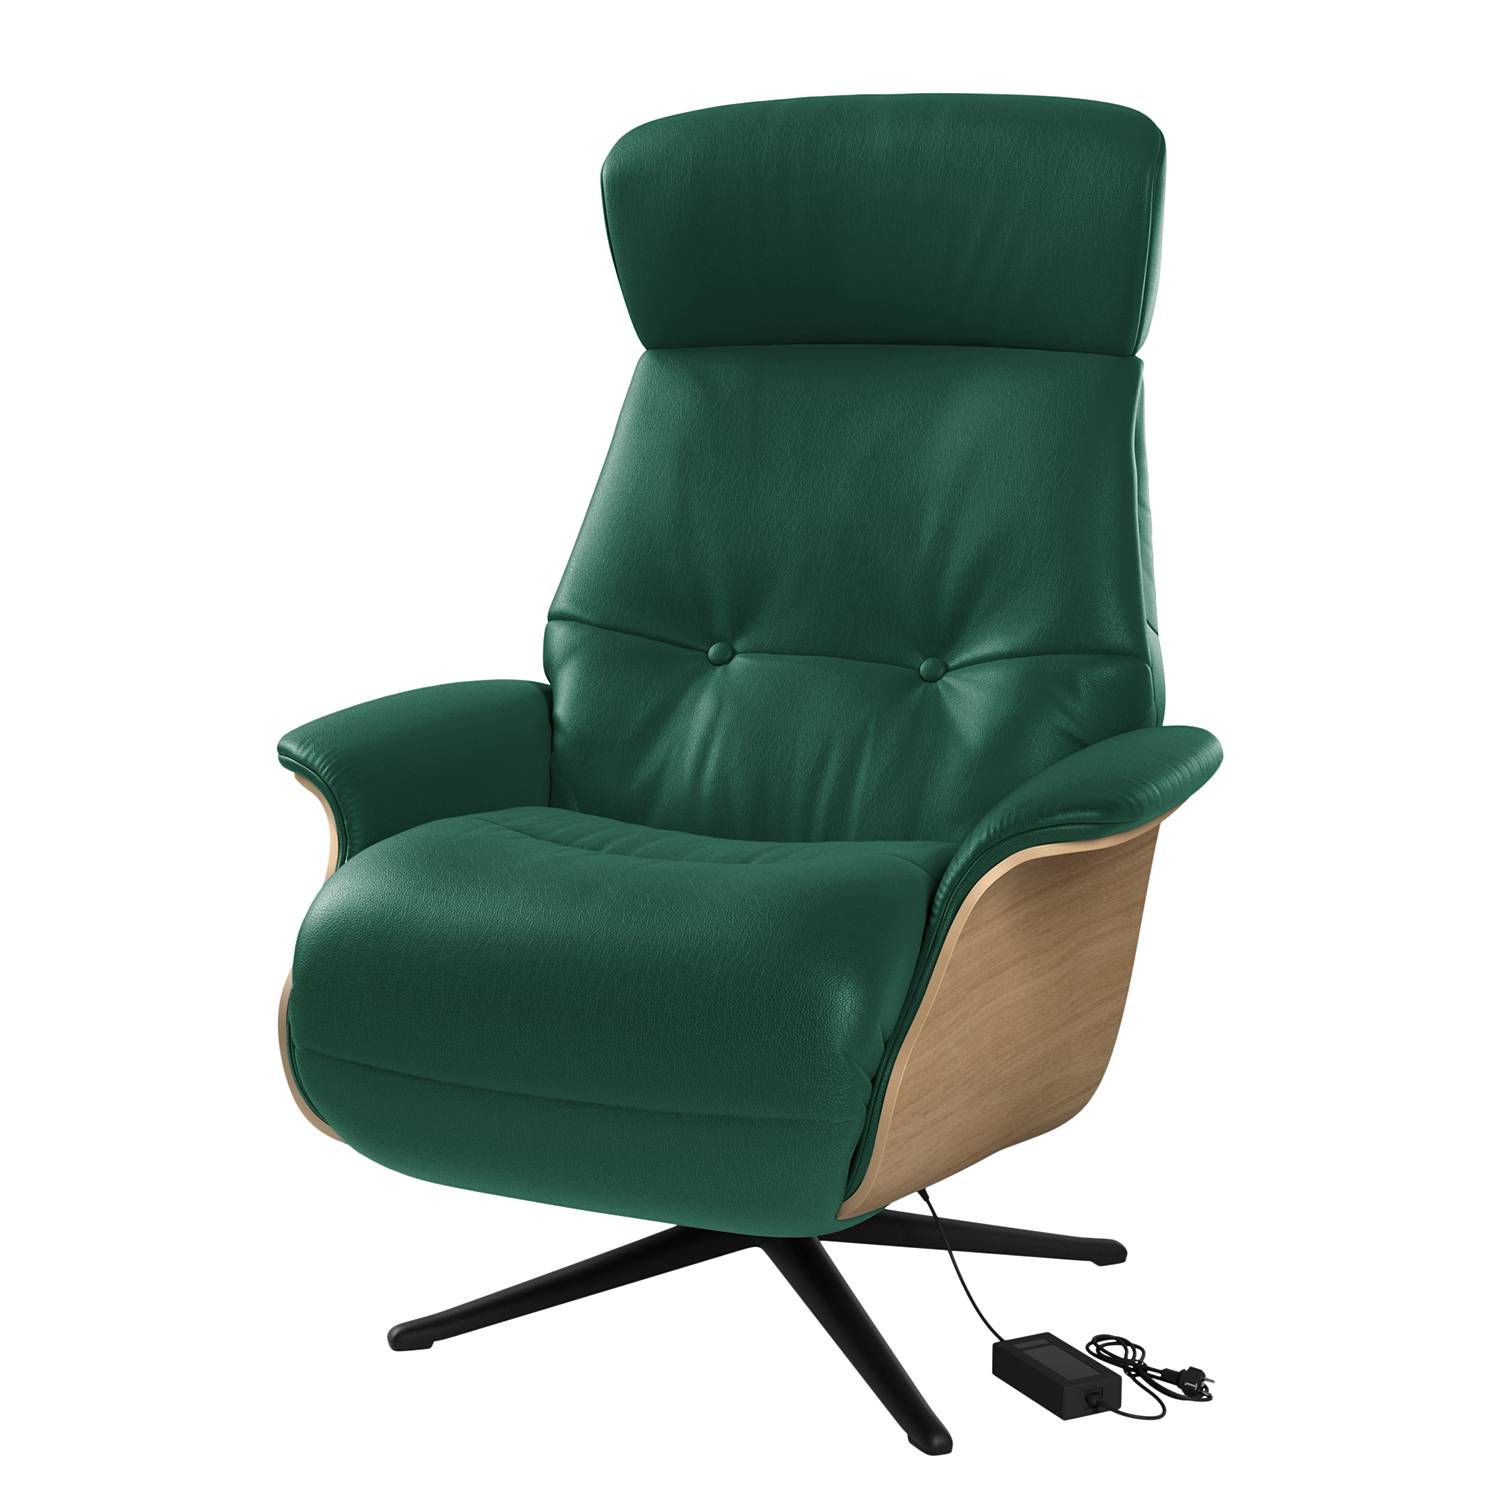 Image of Fauteuil relax Anderson VI 000000001000131417